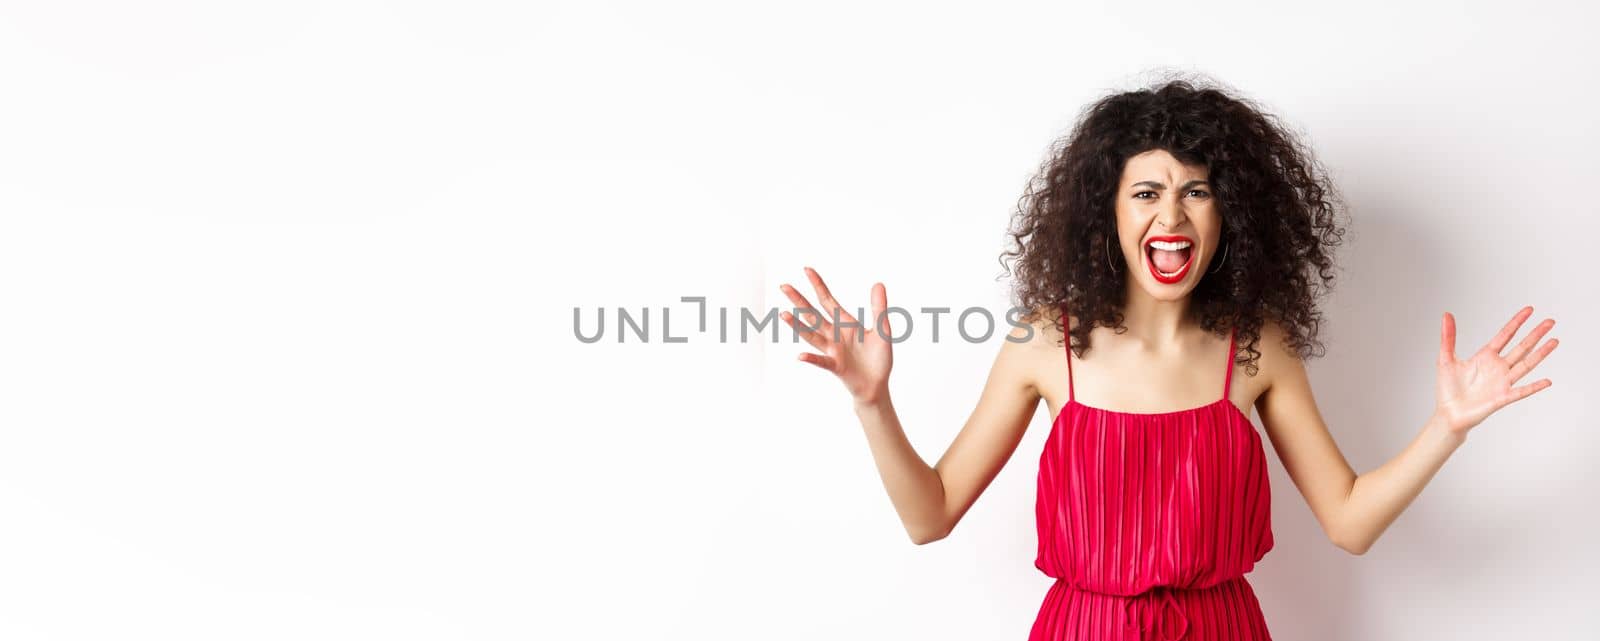 Angry young woman with curly hair, wearing red dress, screaming and having an argument, looking with hatred and anger, standing over white background.